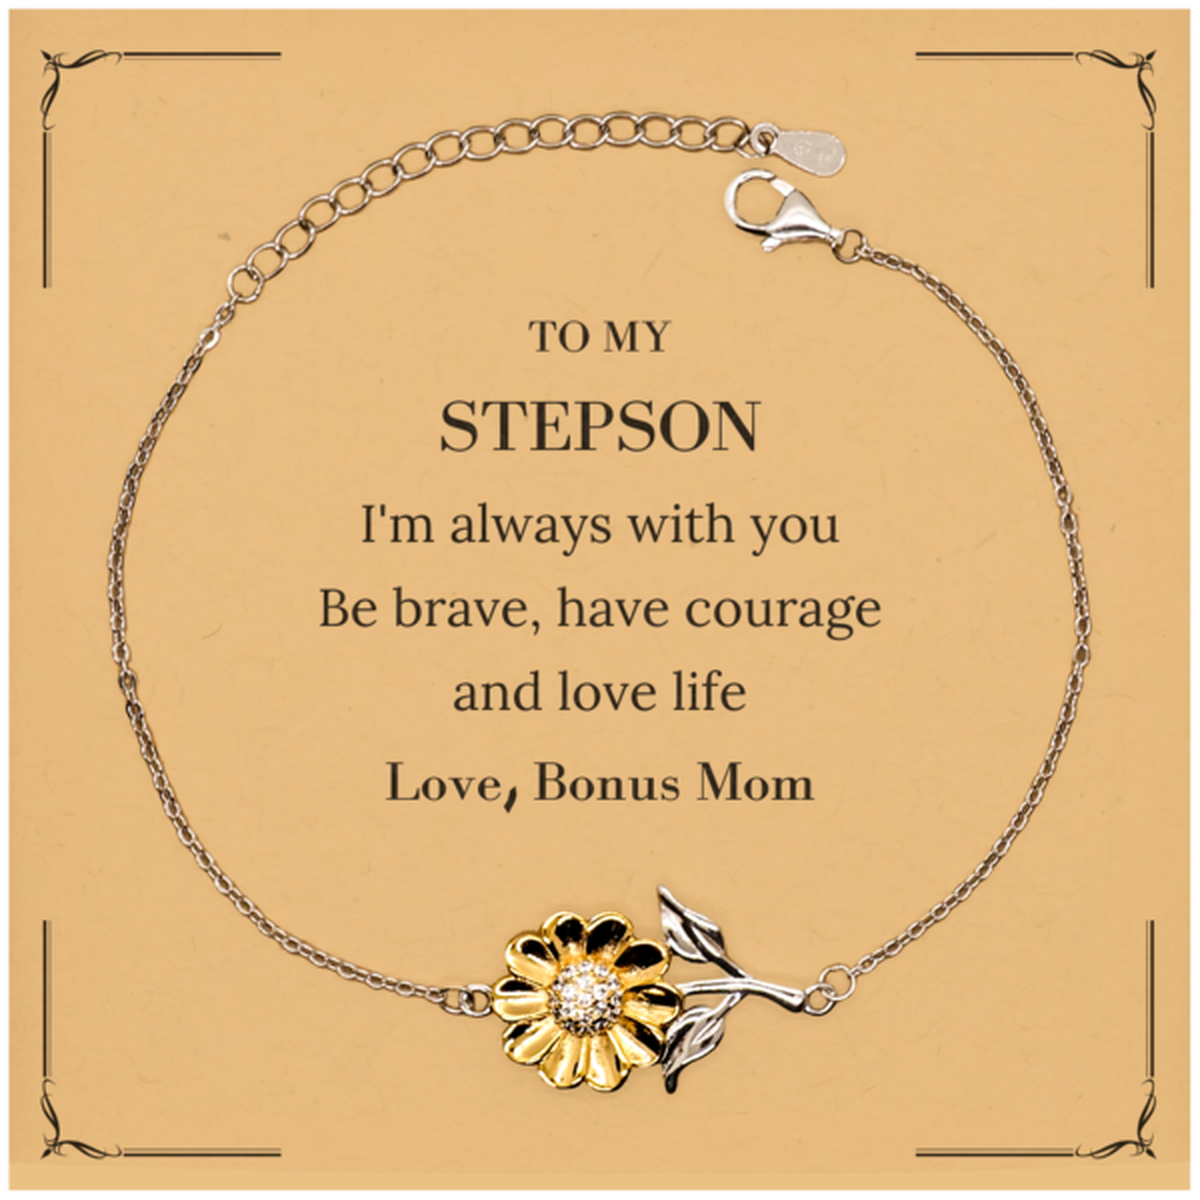 To My Stepson Gifts from Bonus Mom, Unique Sunflower Bracelet Inspirational Christmas Birthday Graduation Gifts for Stepson I'm always with you. Be brave, have courage and love life. Love, Bonus Mom